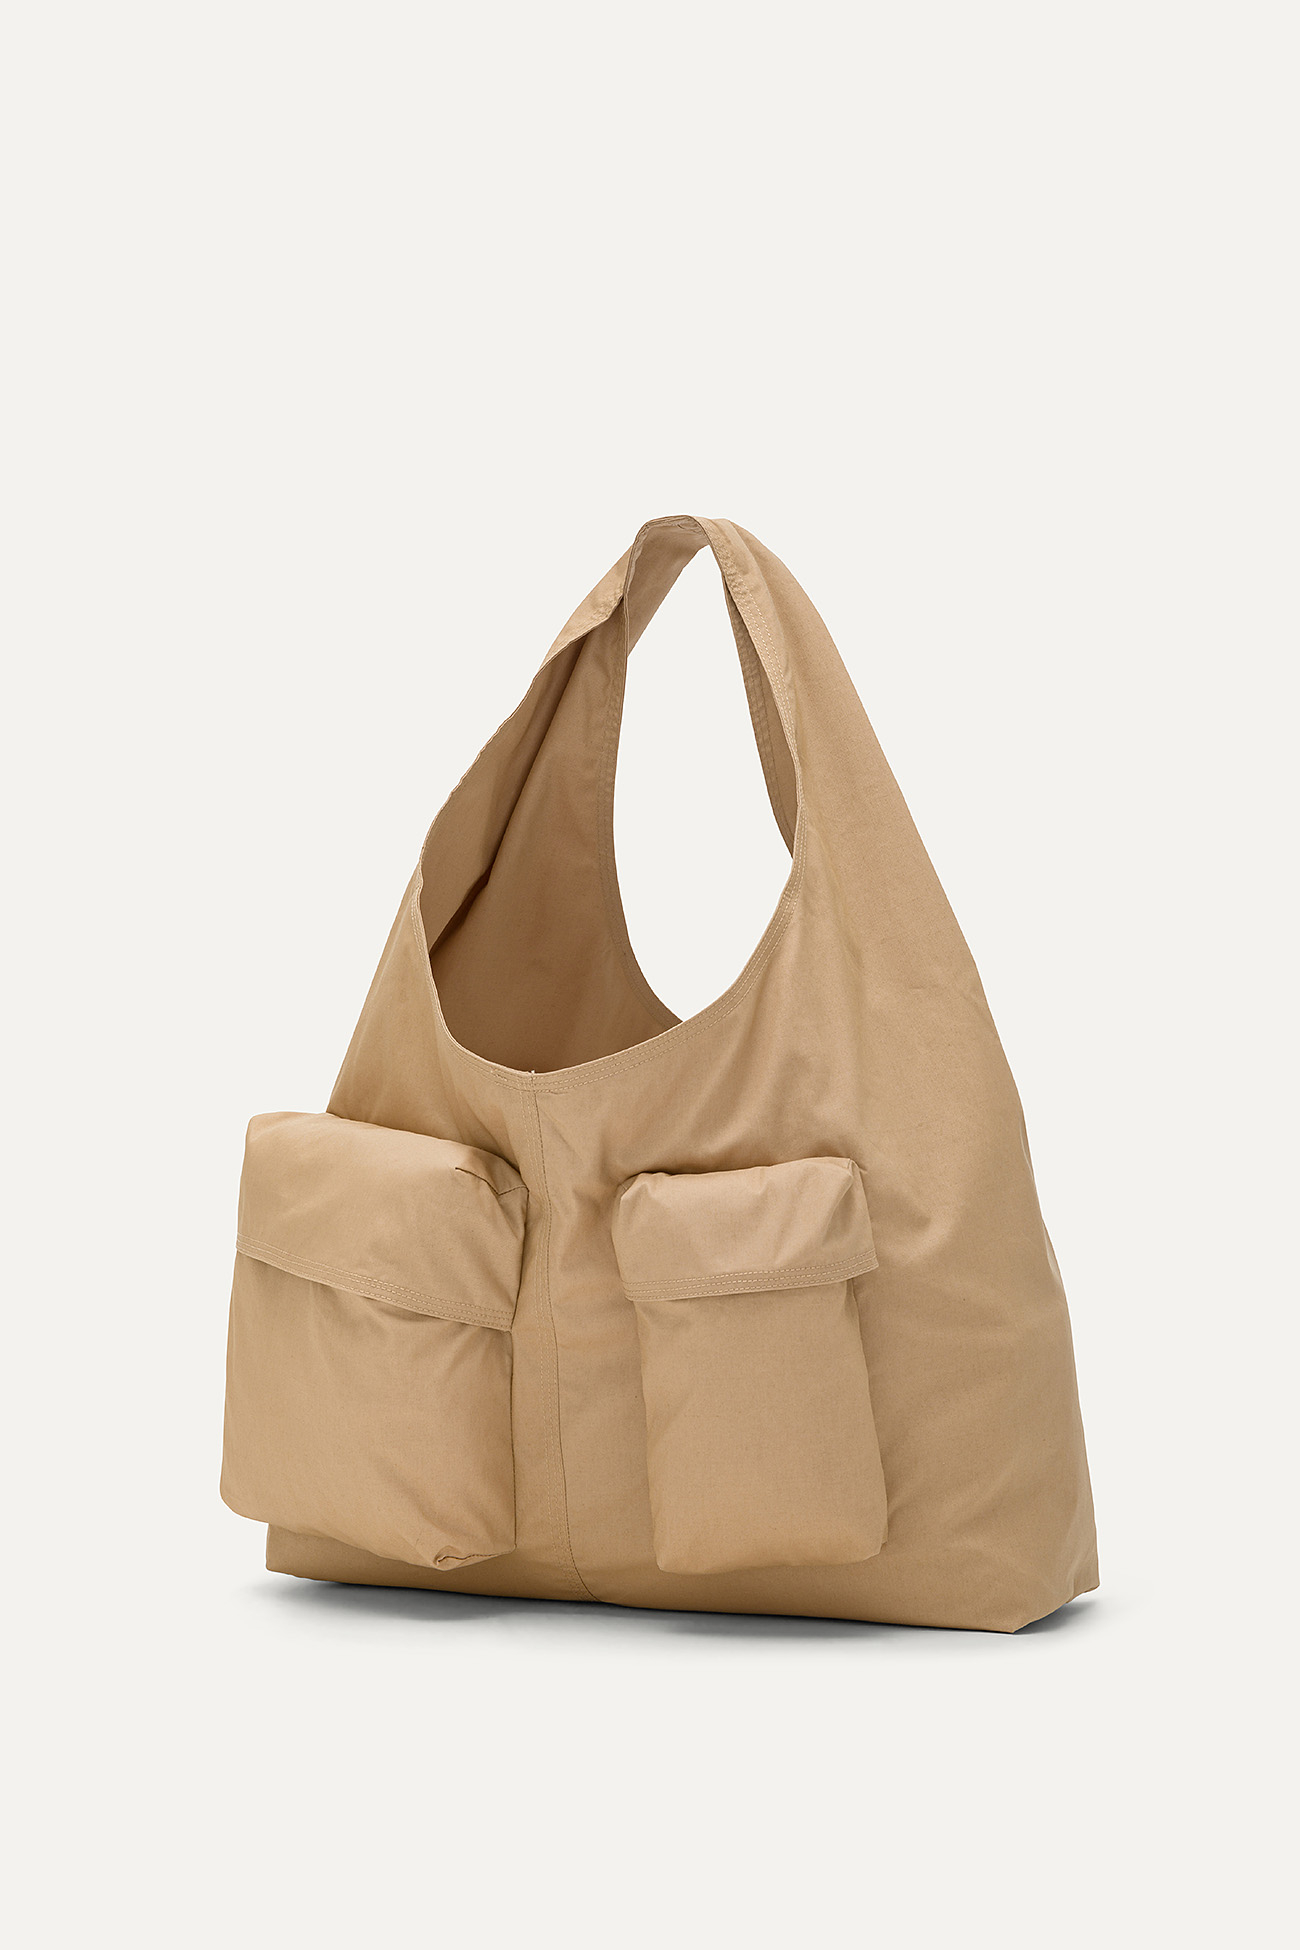 BAG WITH POCKETS IN COTTON GABARDINE 3085 - NATURAL - OOF WEAR